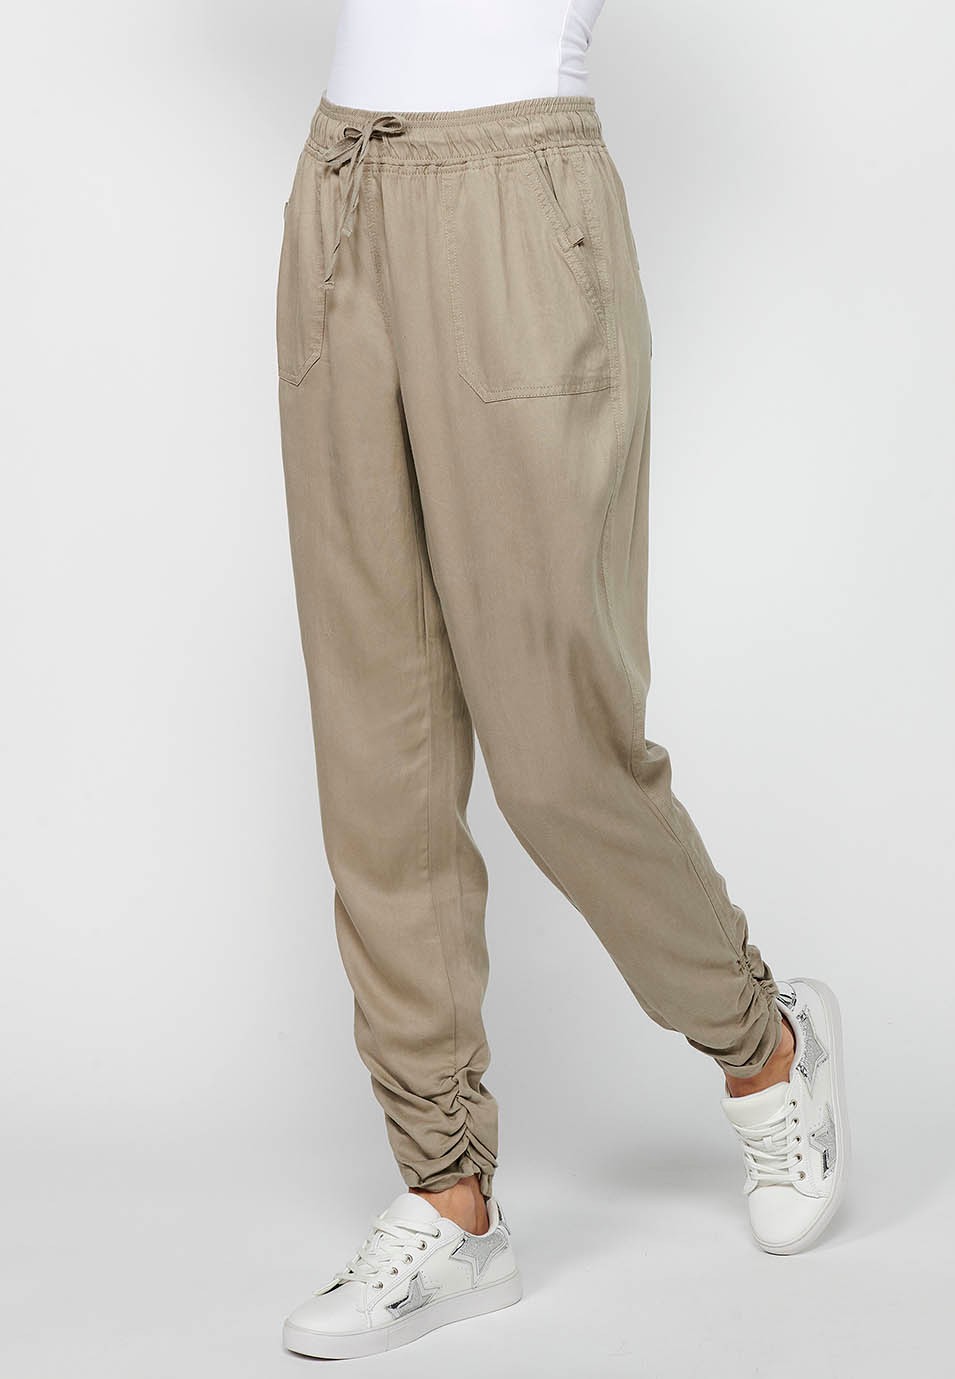 Long jogger pants with curled finish and rubberized waist with four pockets, two rear pockets with flap in Gray for Women 1